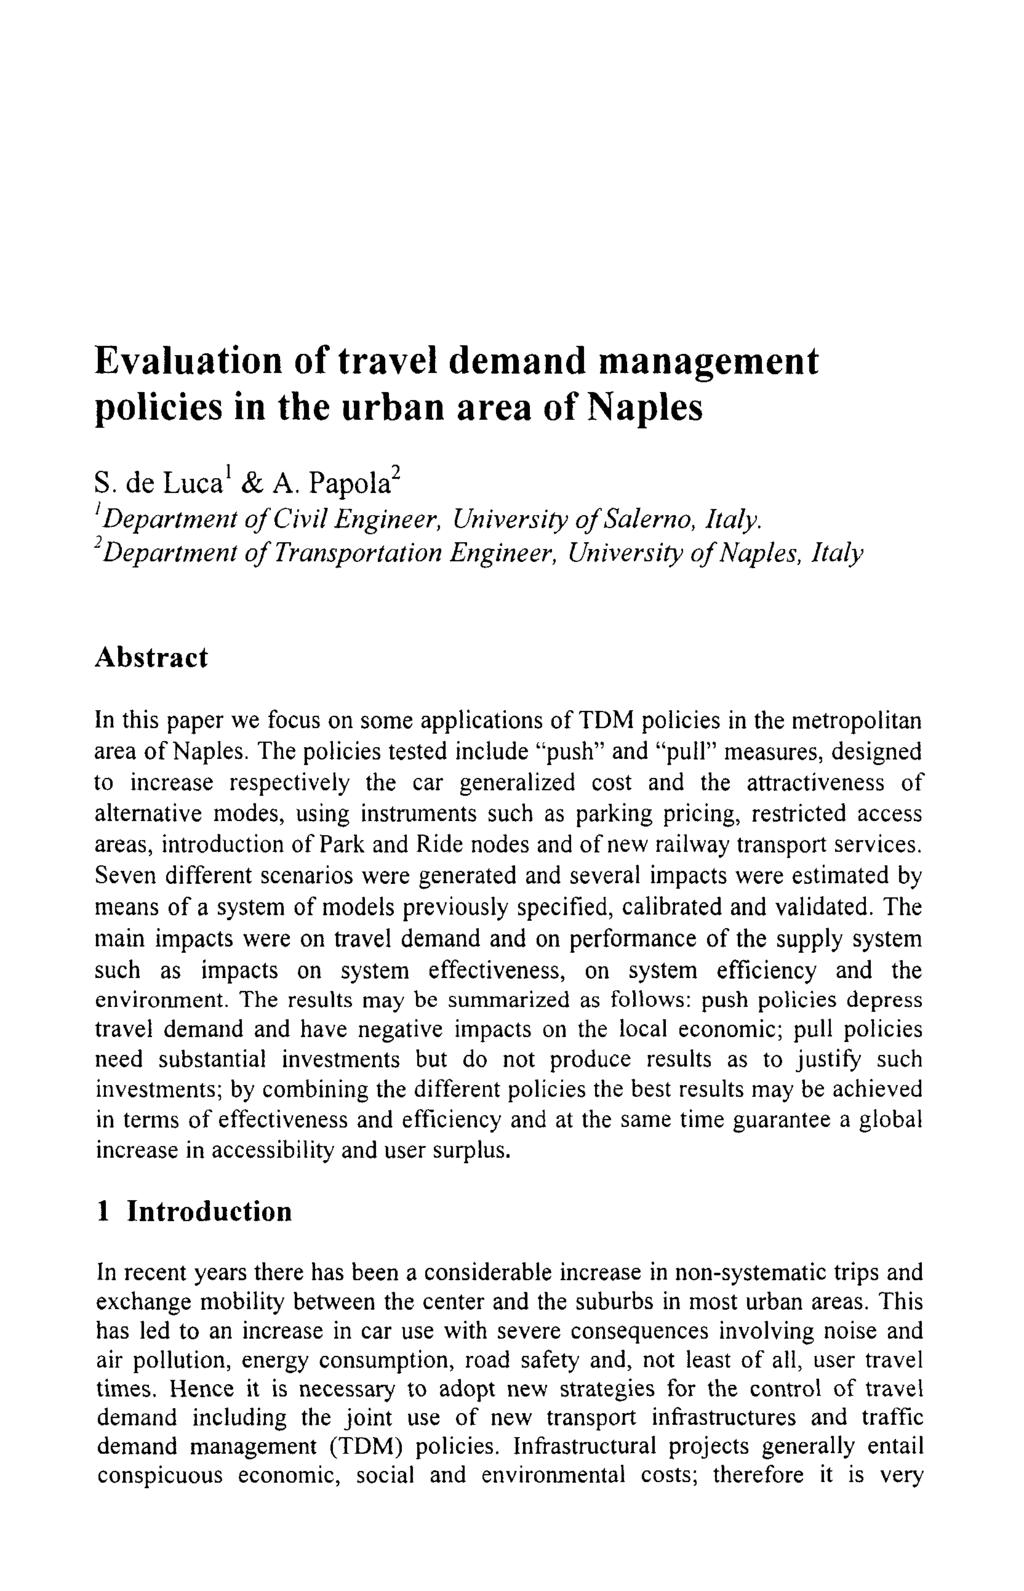 Evaluation of travel demand management policies in the urban area of Naples S. de ~uca' & A. papola2 i Department of Civil Engineer, University of Salerno, Italy.